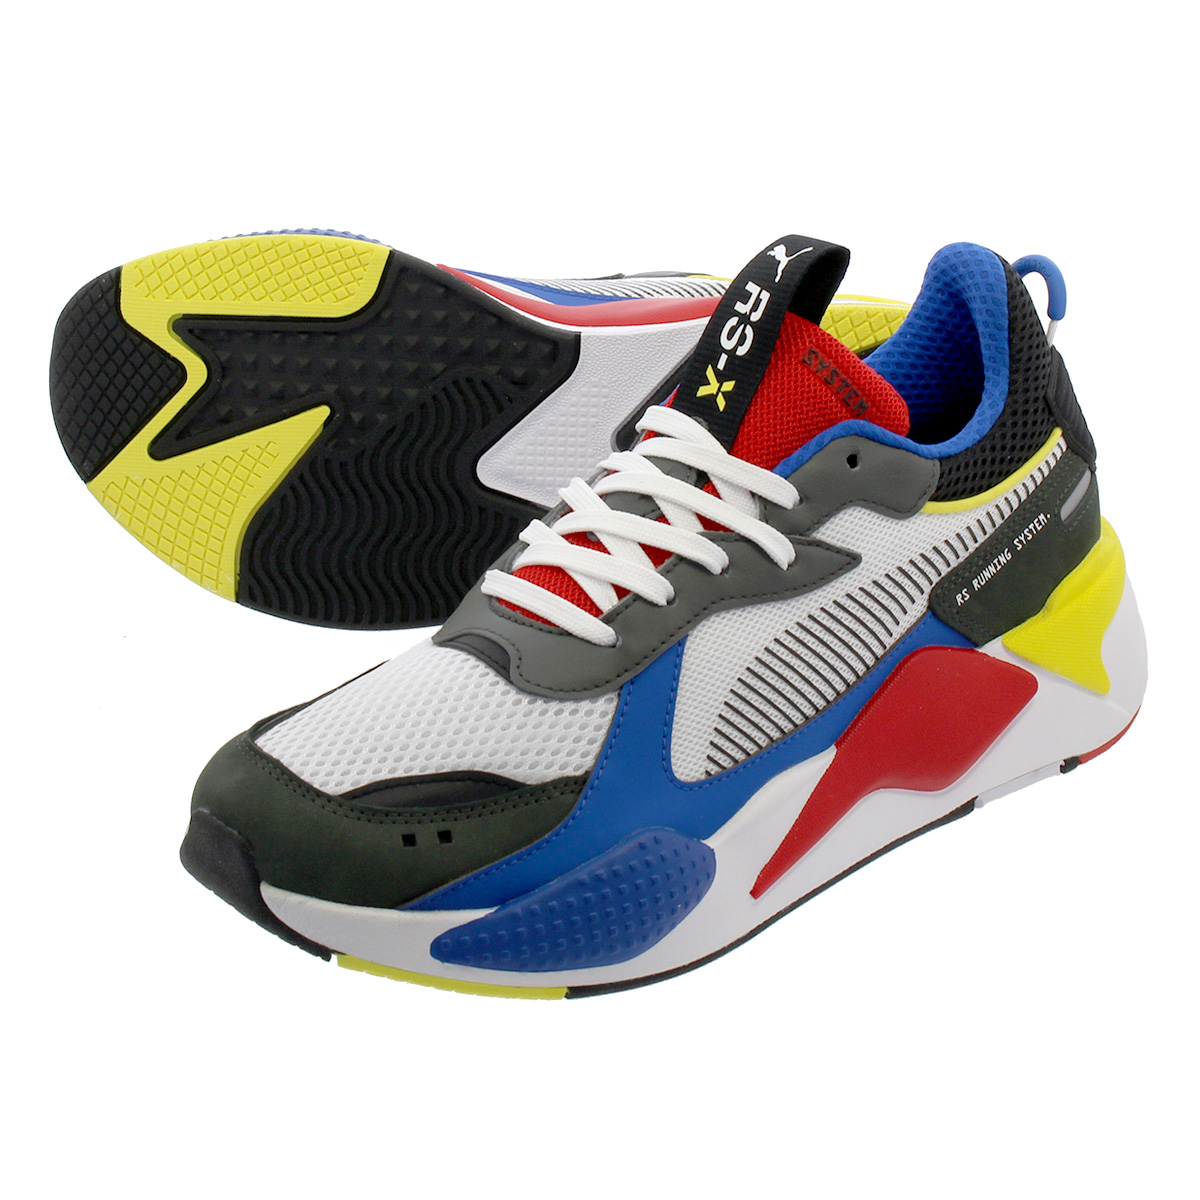 puma rs x toys price in philippines